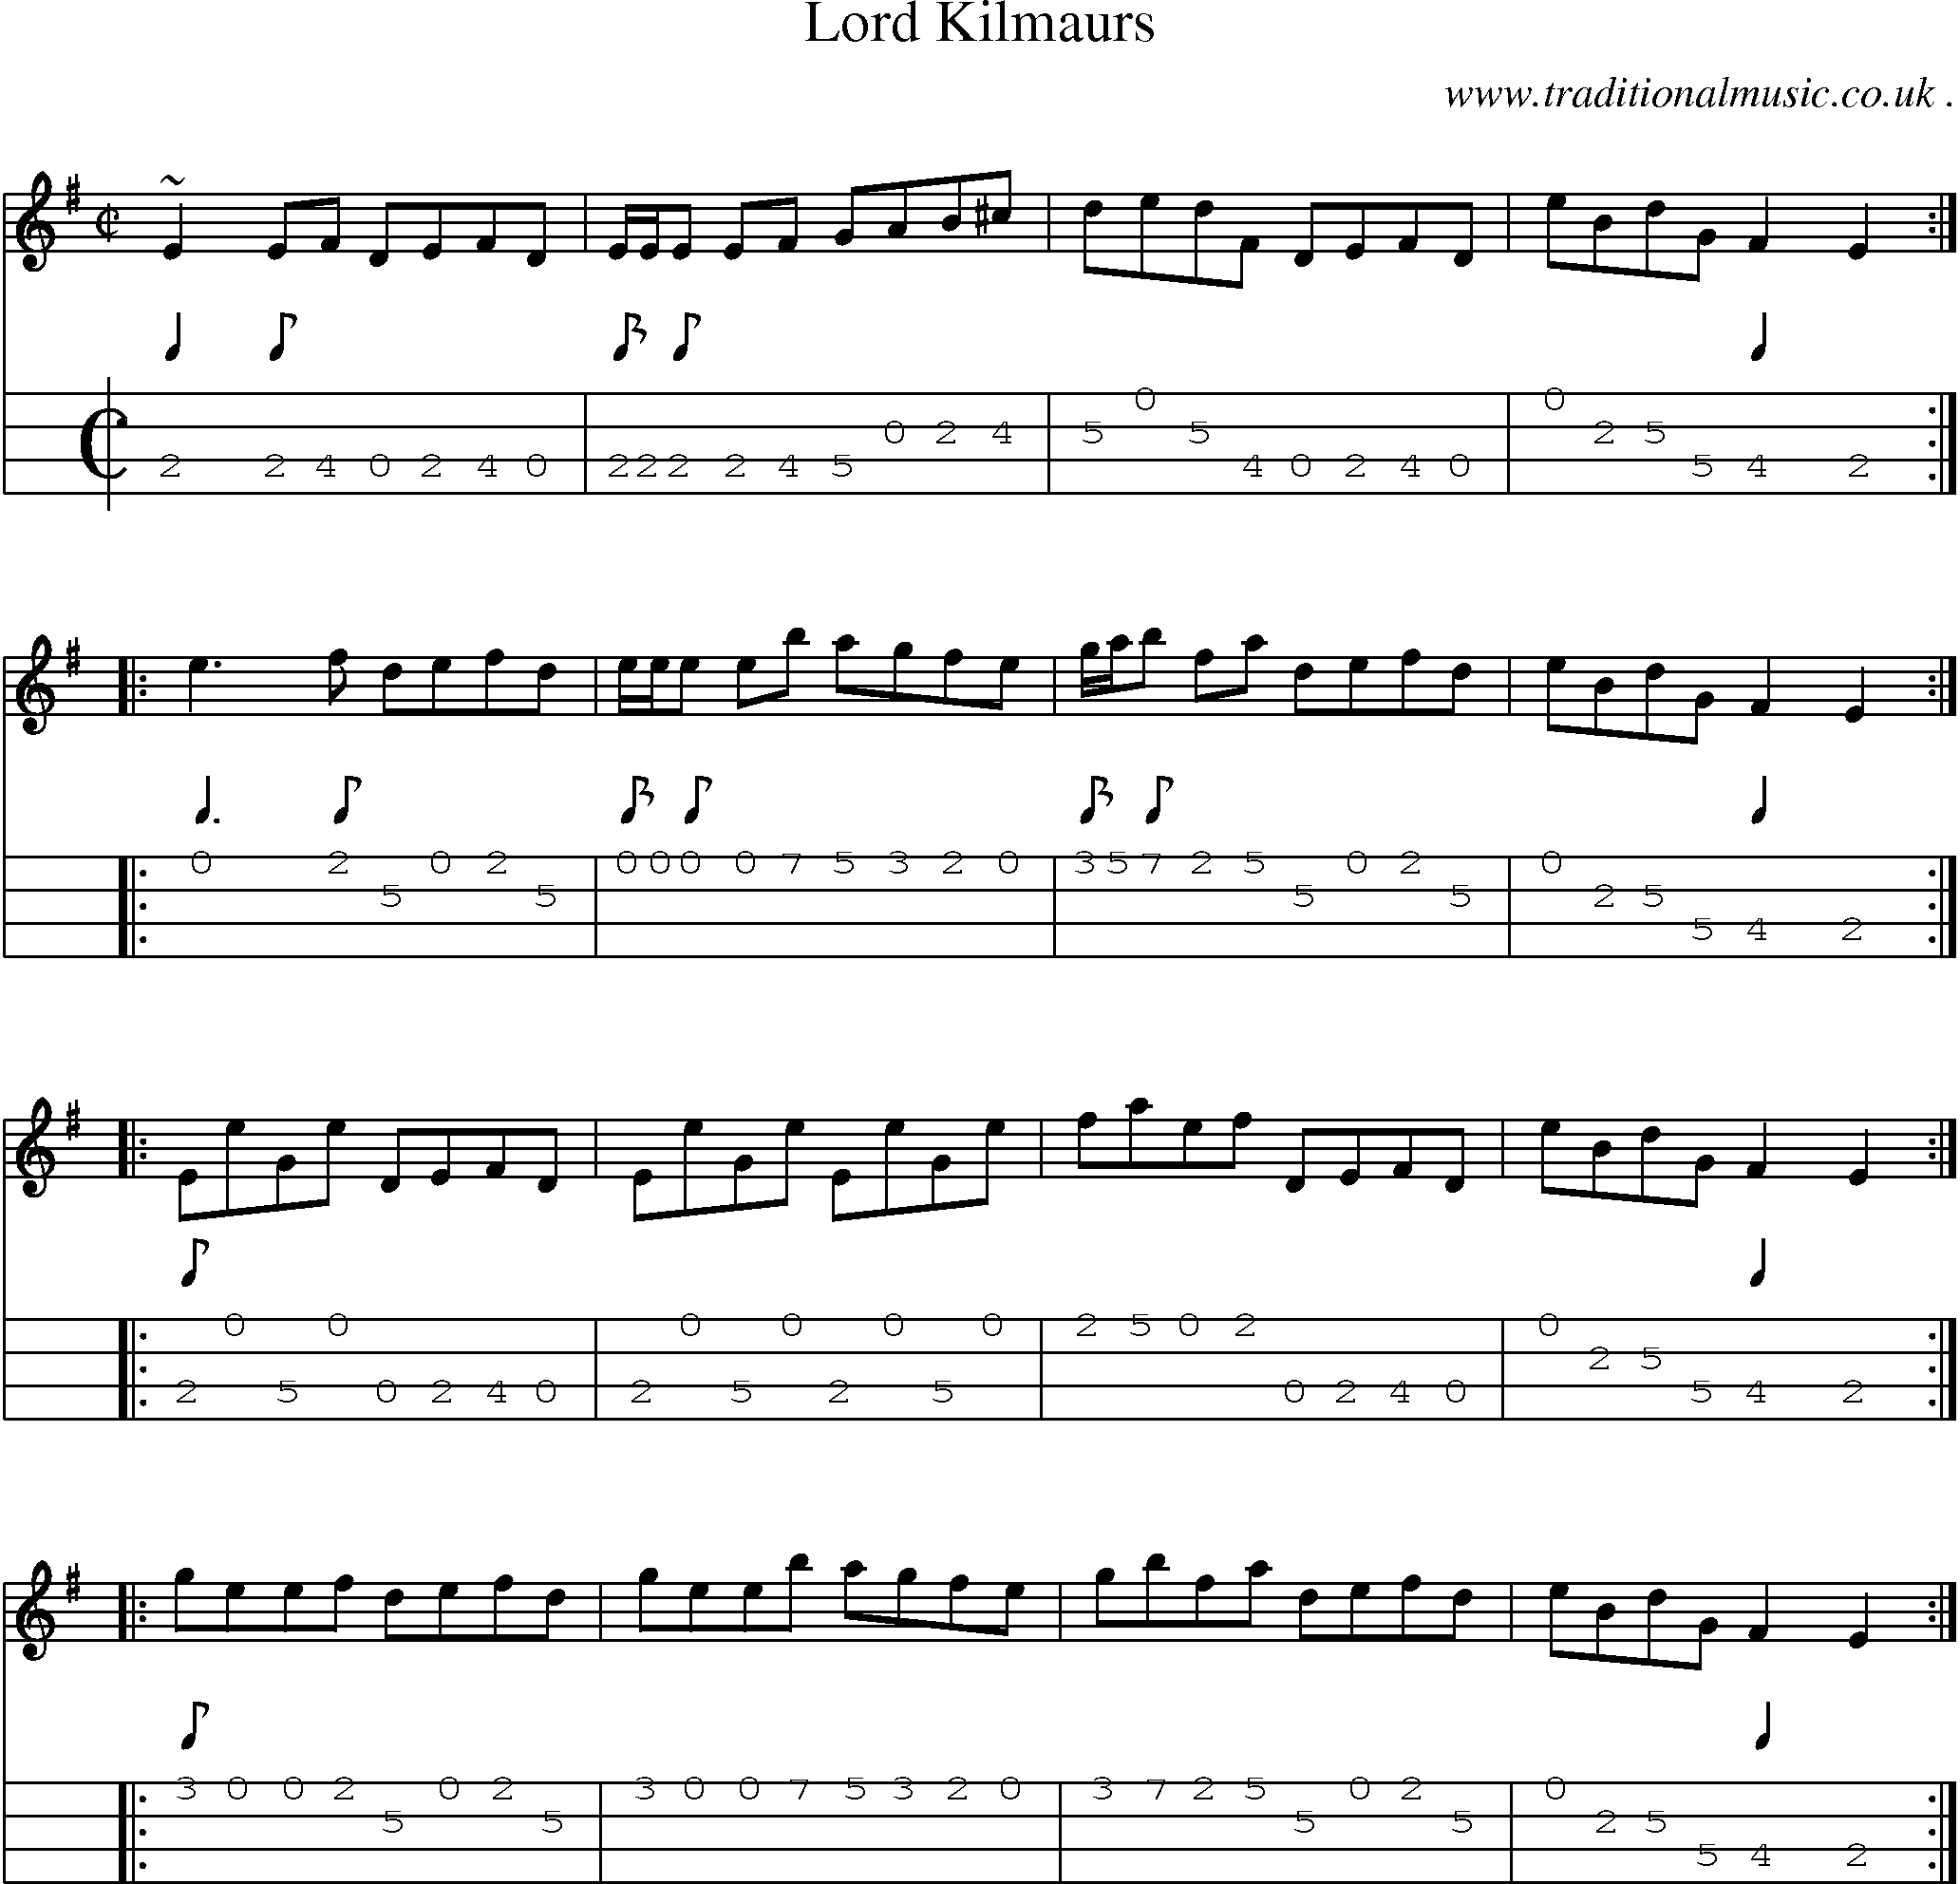 Sheet-music  score, Chords and Mandolin Tabs for Lord Kilmaurs